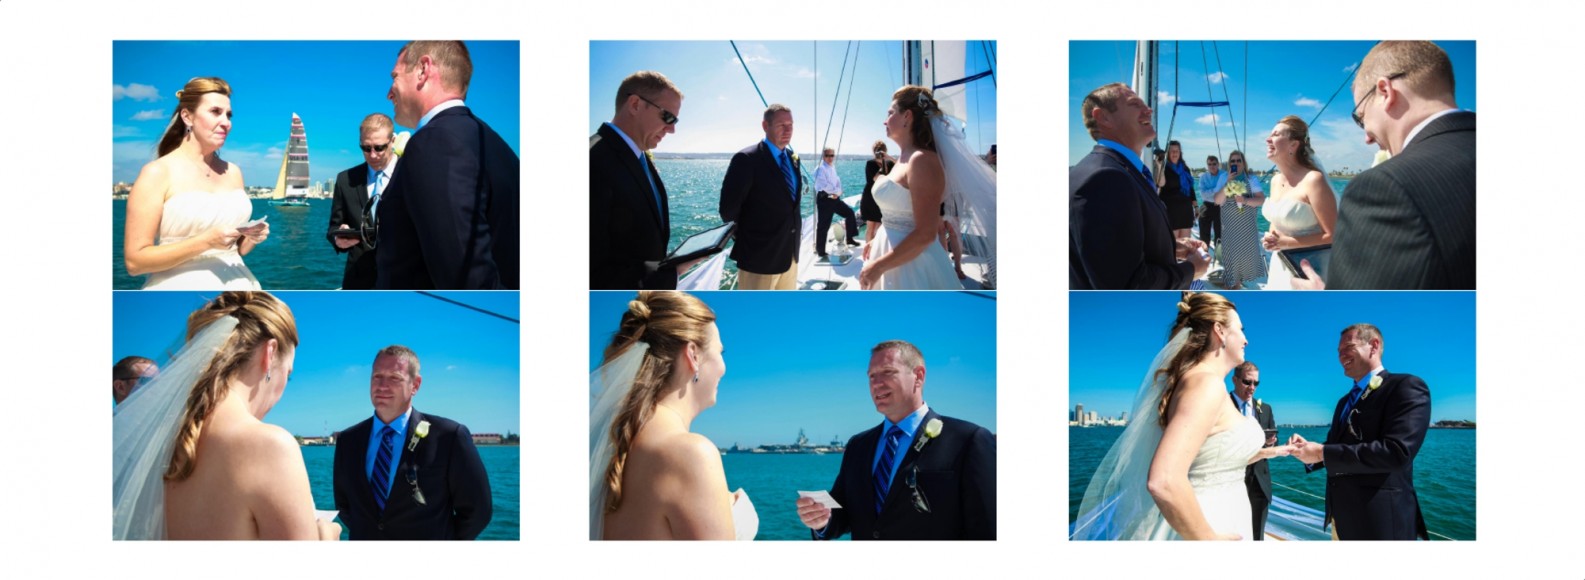 Laura and Davids Wedding Book - San Diego Yacht Wedding by Wedding Photographers Andrew Abouna - Pages 16-17